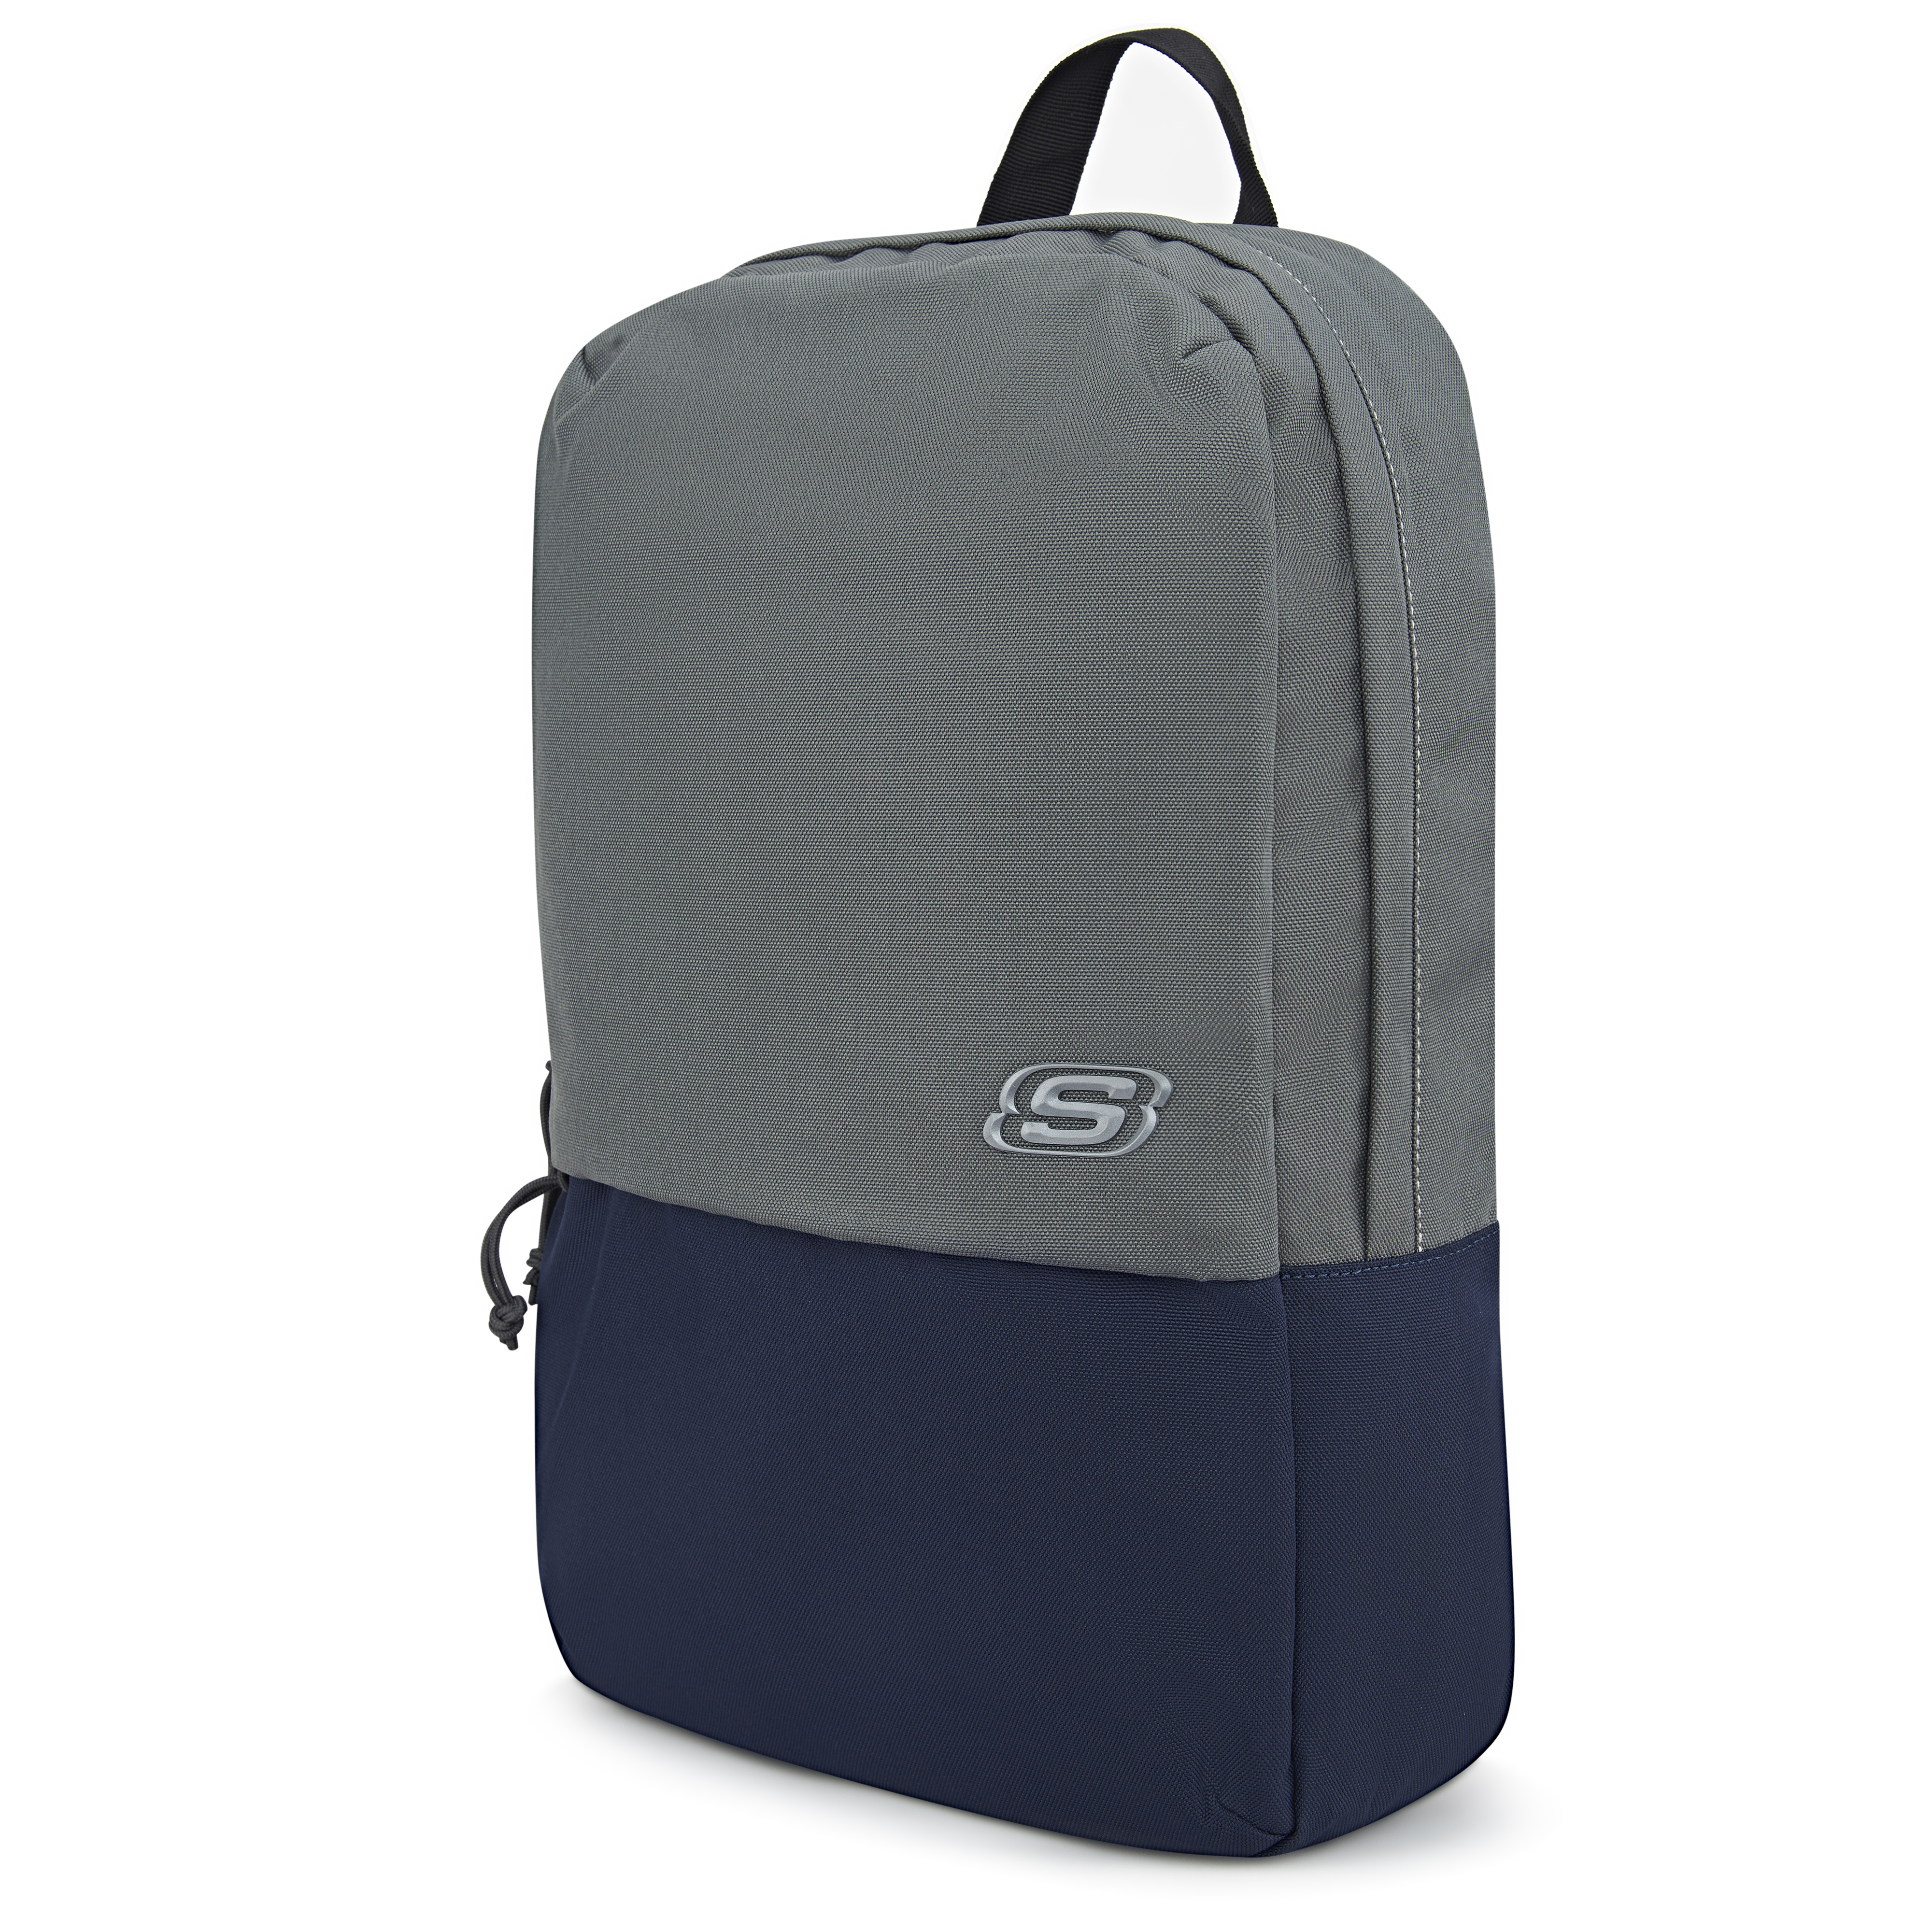 BACKPACK, GREY/NAVY Accessories Top View